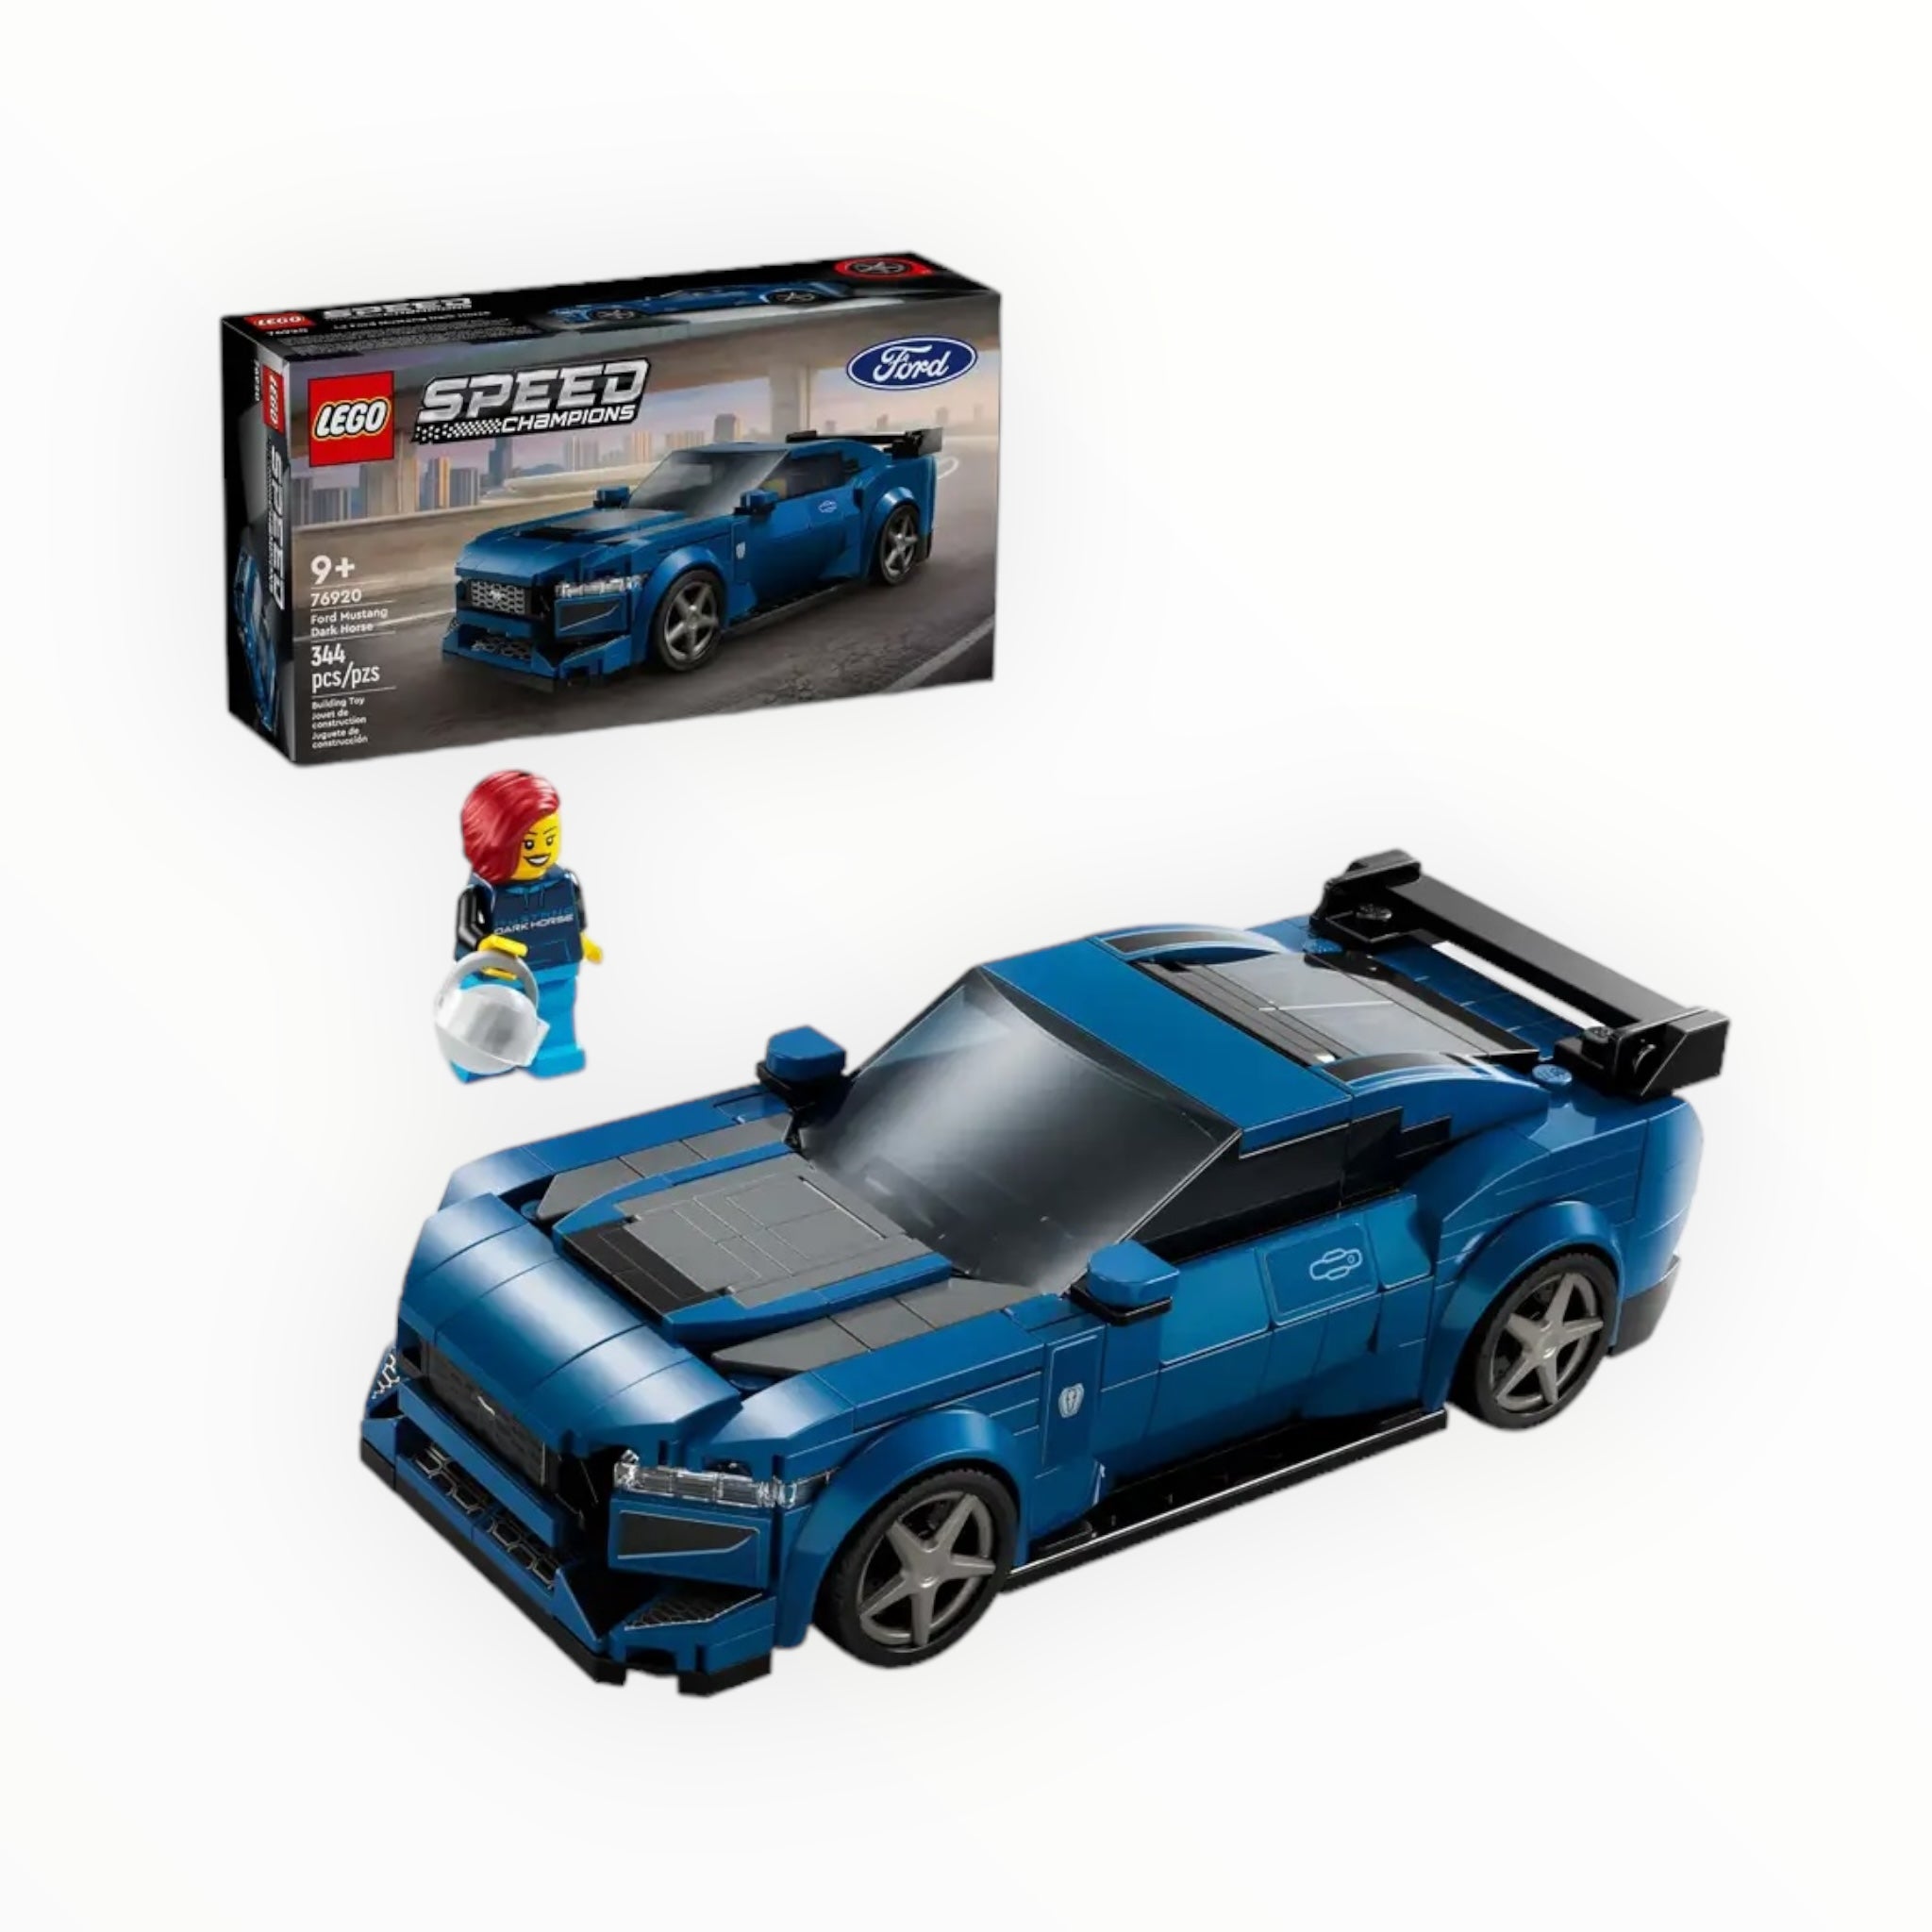 76920 Speed Champions Ford Mustang Dark Horse Sports Car